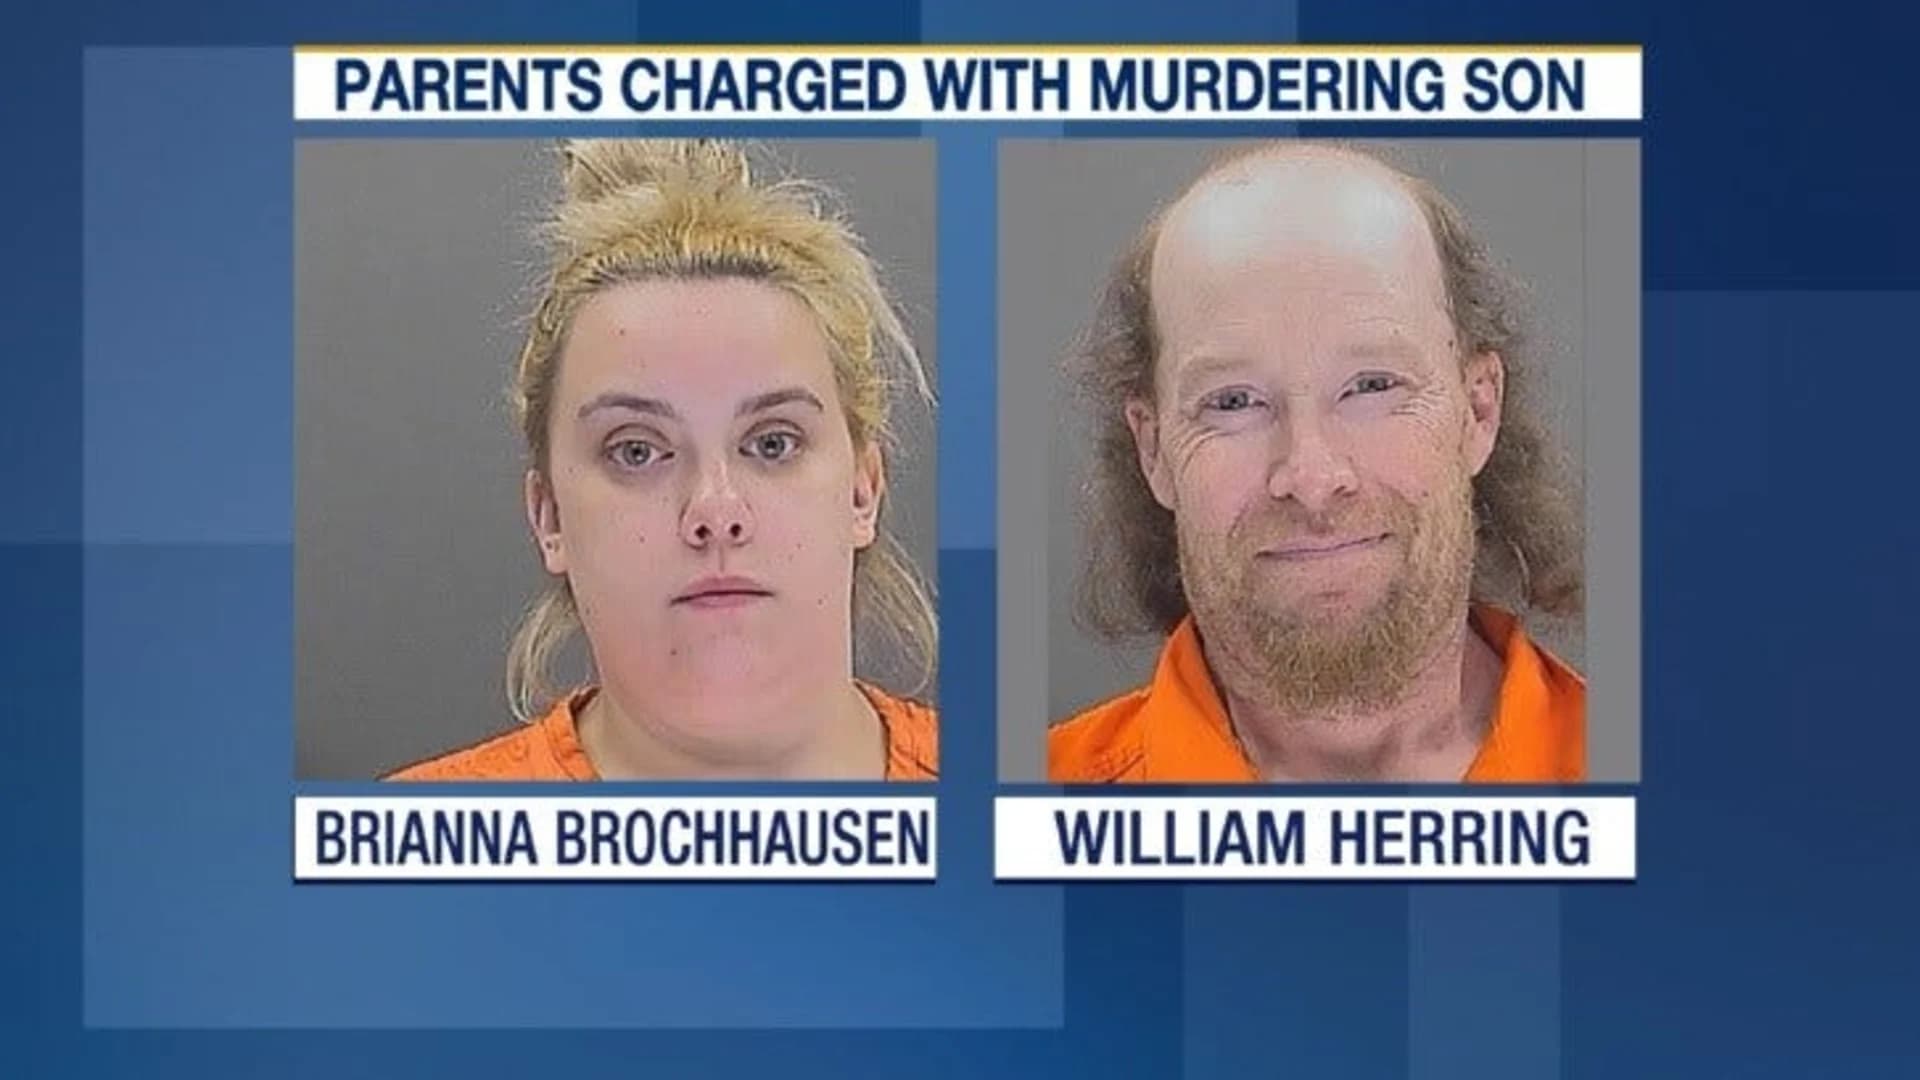 Prosecutors: Parents placed 4-month-old in ‘time out;' put comforter over him and left room